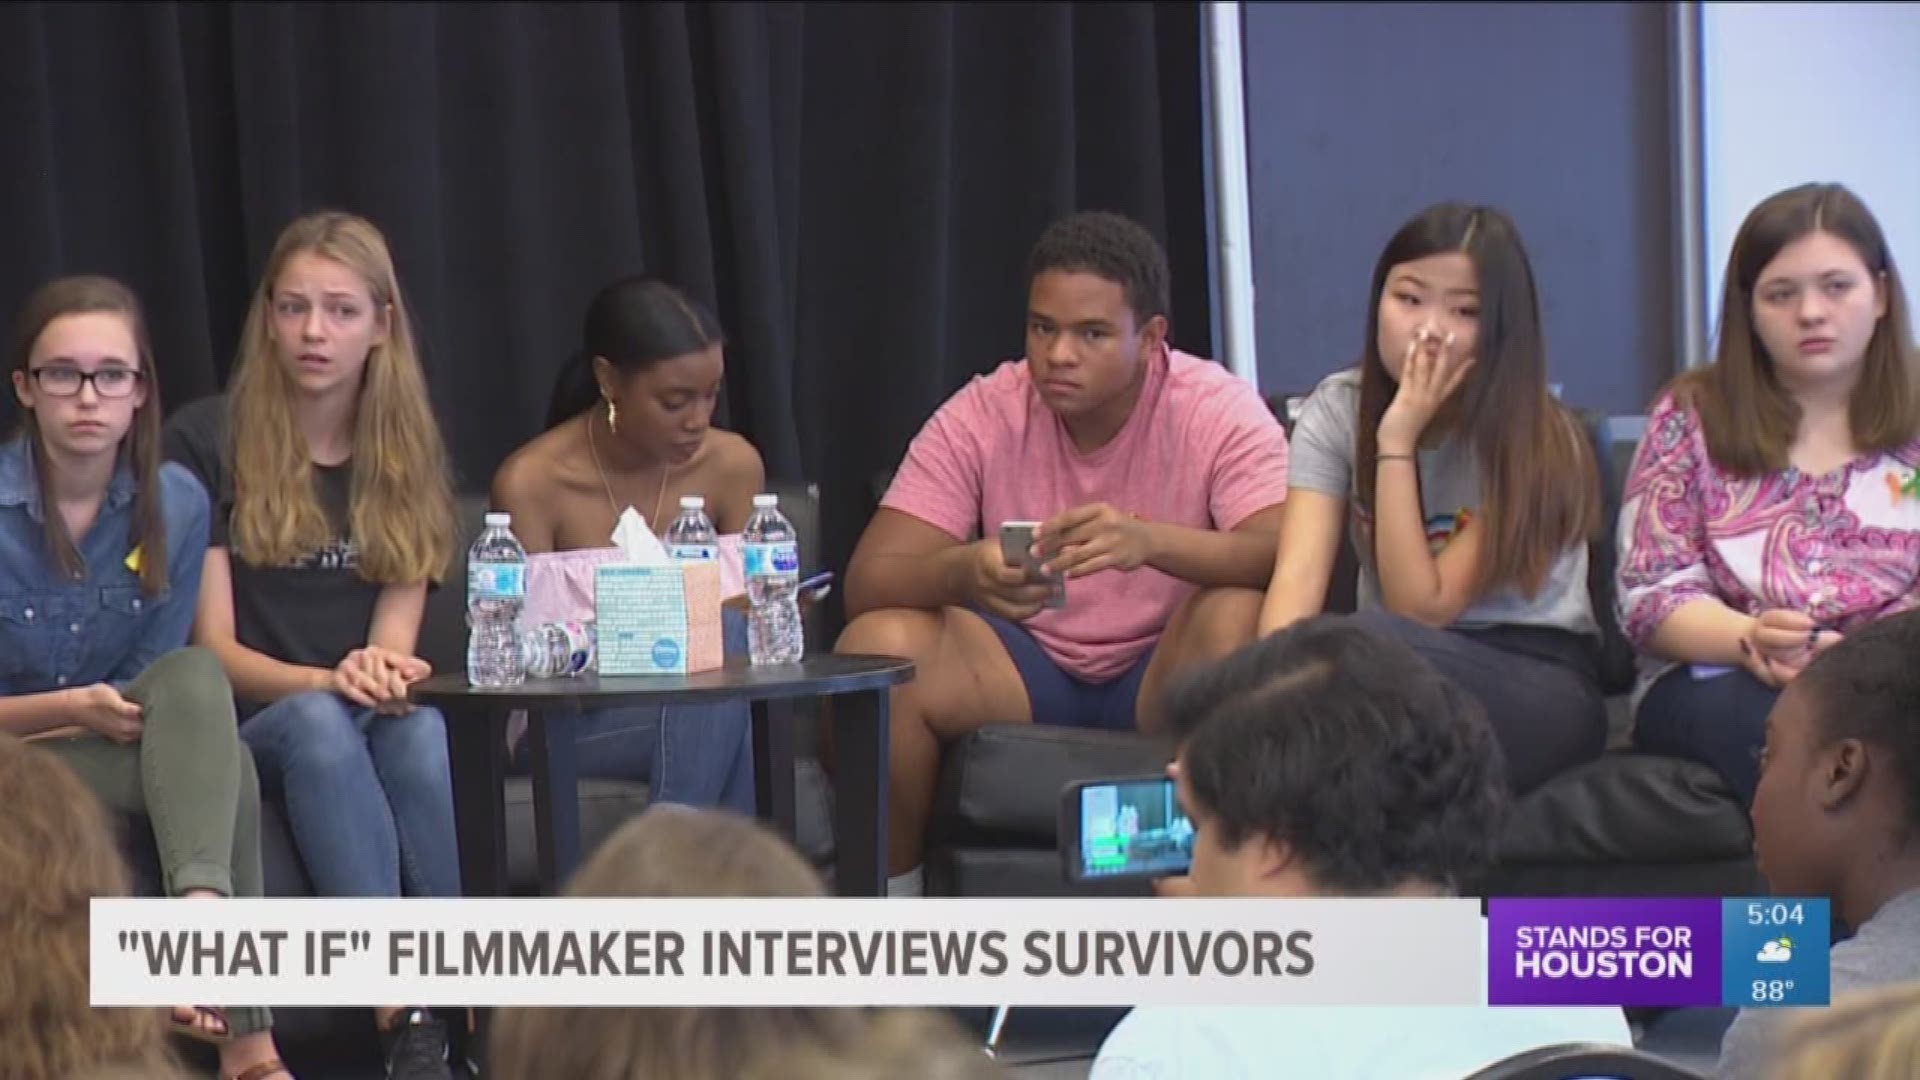 A filmmaker interviewed survivors of the Santa Fe High School shooting for "What If" videos on social media.